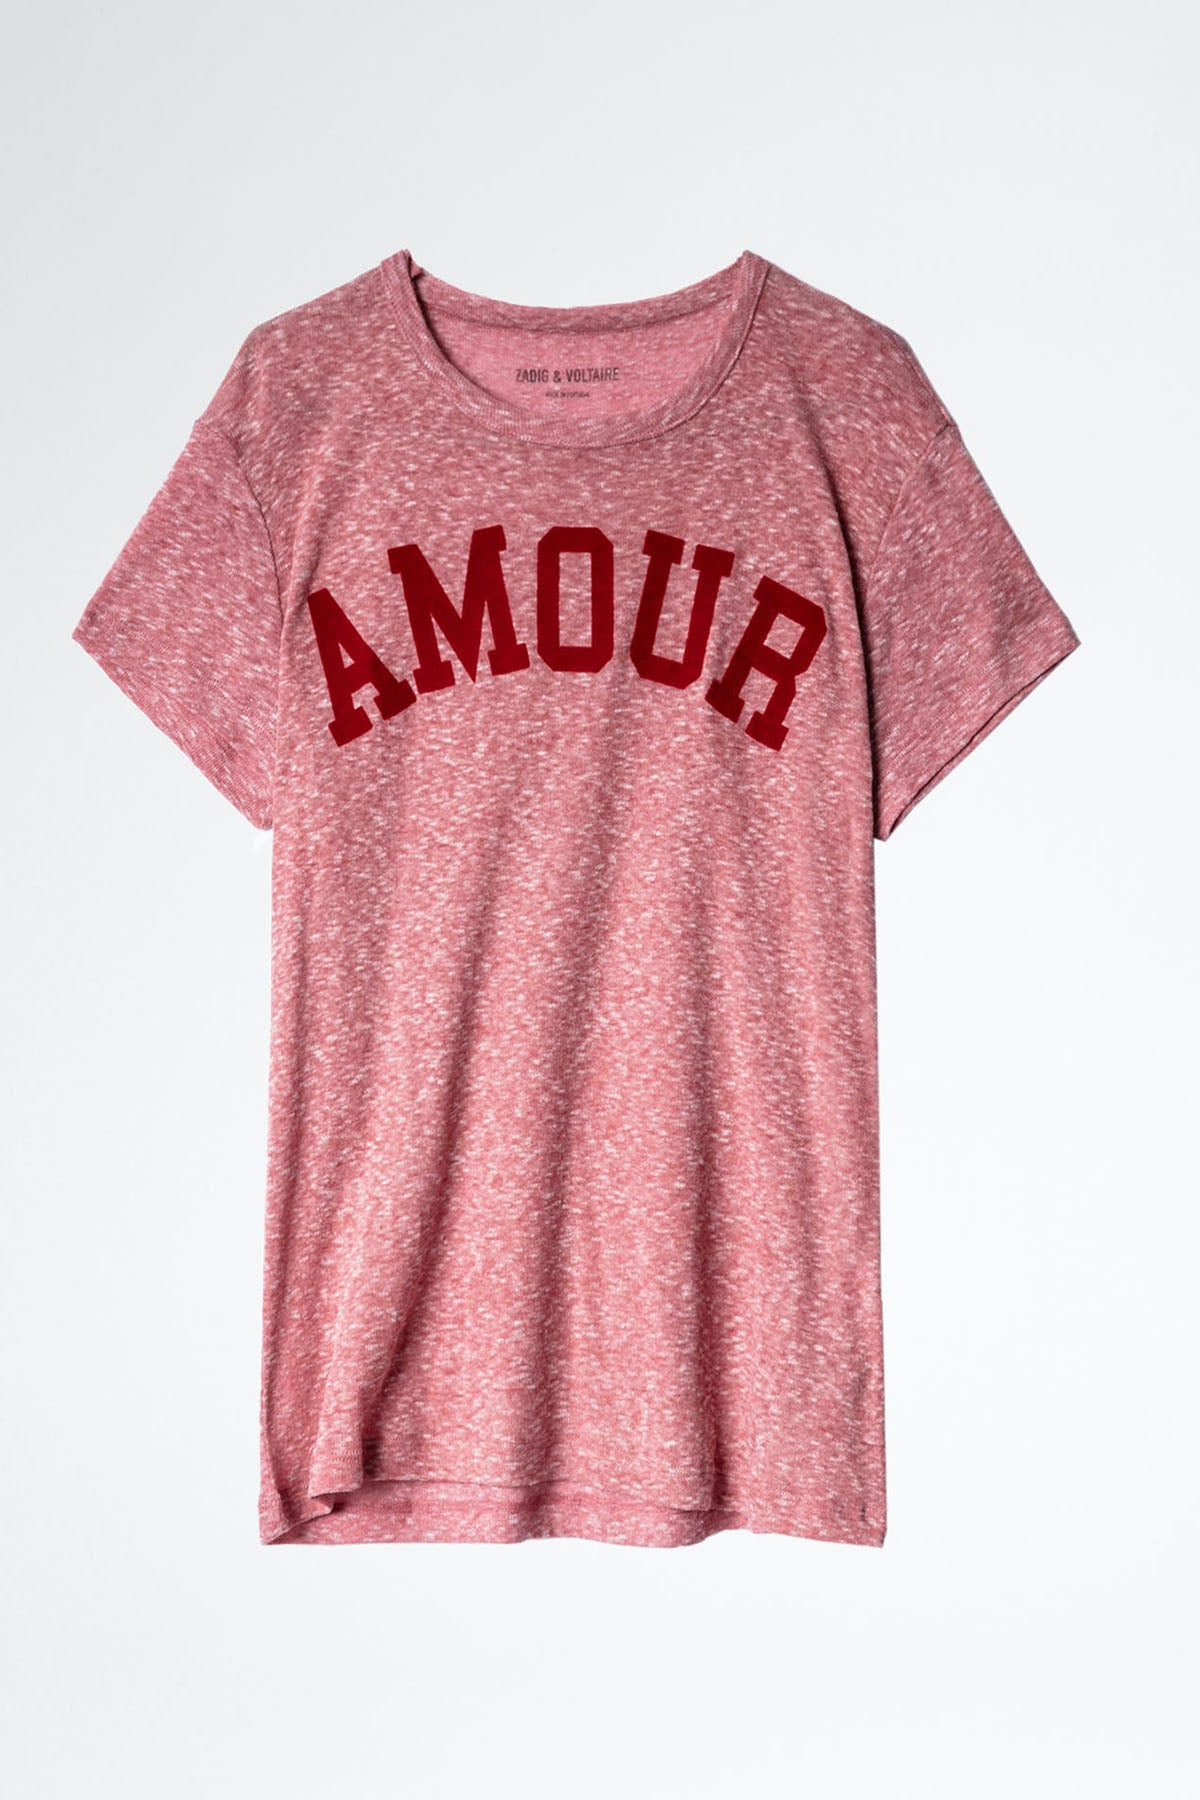 Zadig & Voltaire Amour T-shirt-Libas Trendy Fashion Store